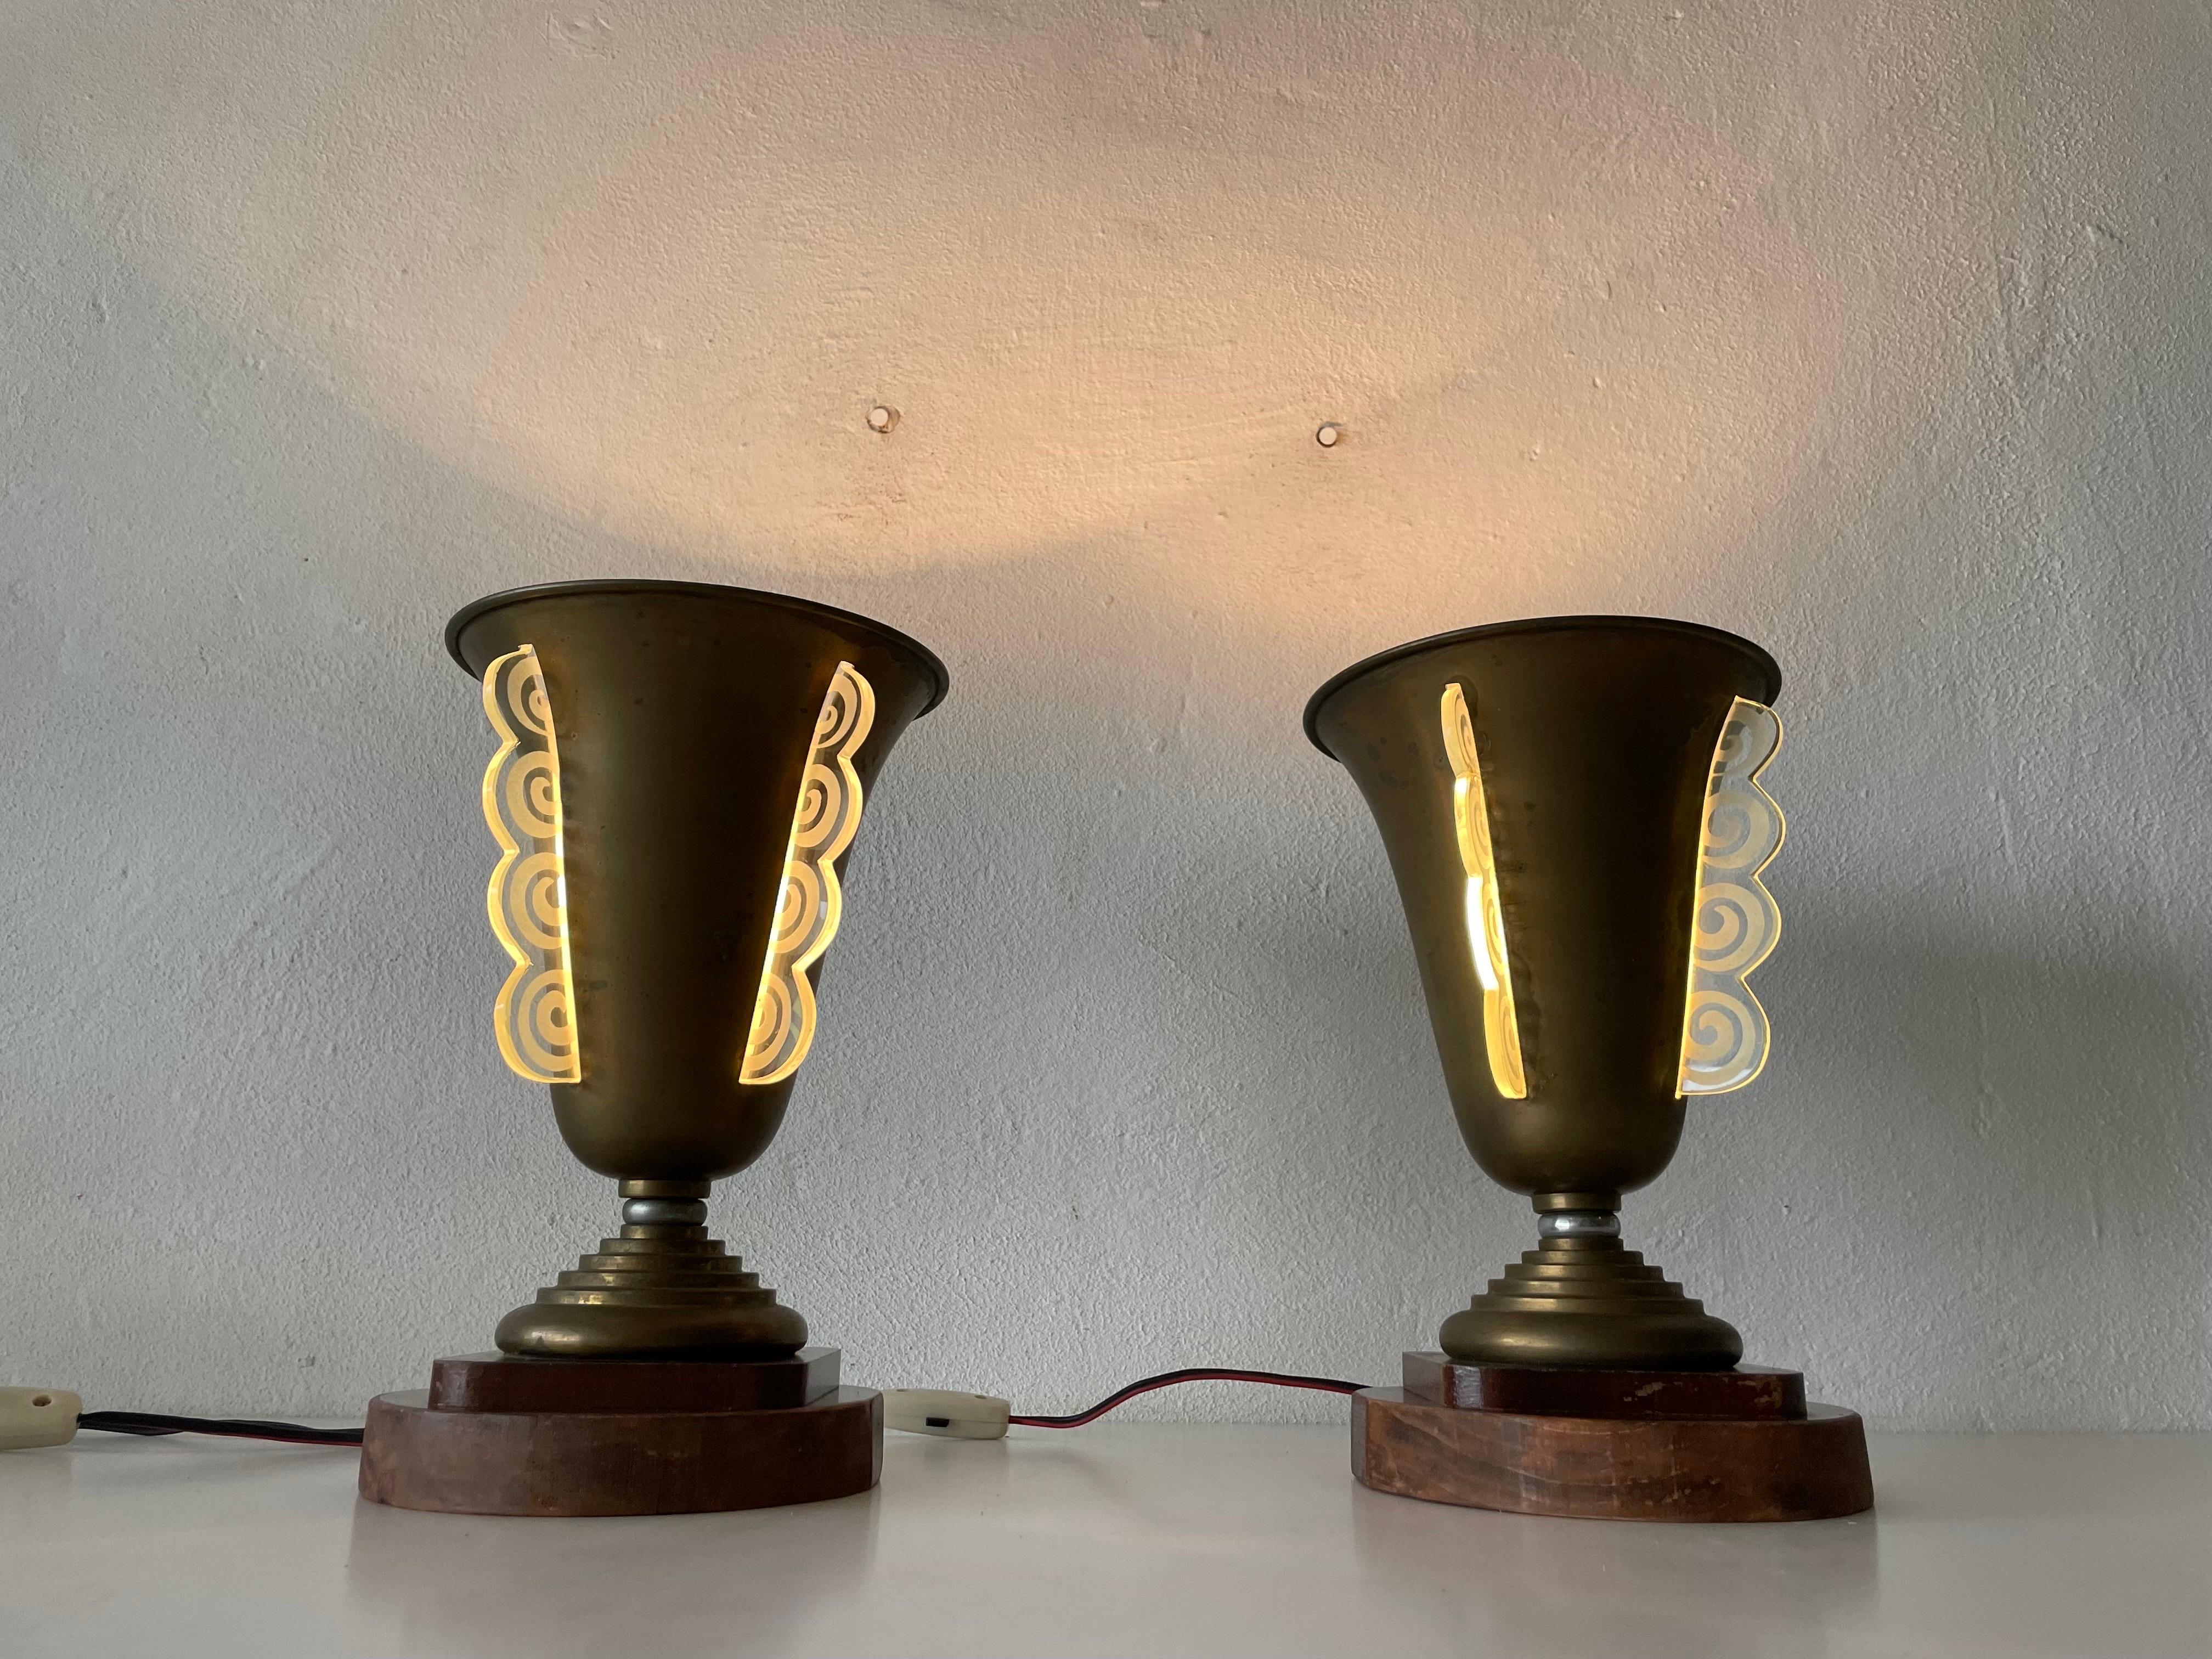 Art Deco Conic Design Pair of Table Lamps by Mazda, 1940s, France For Sale 5